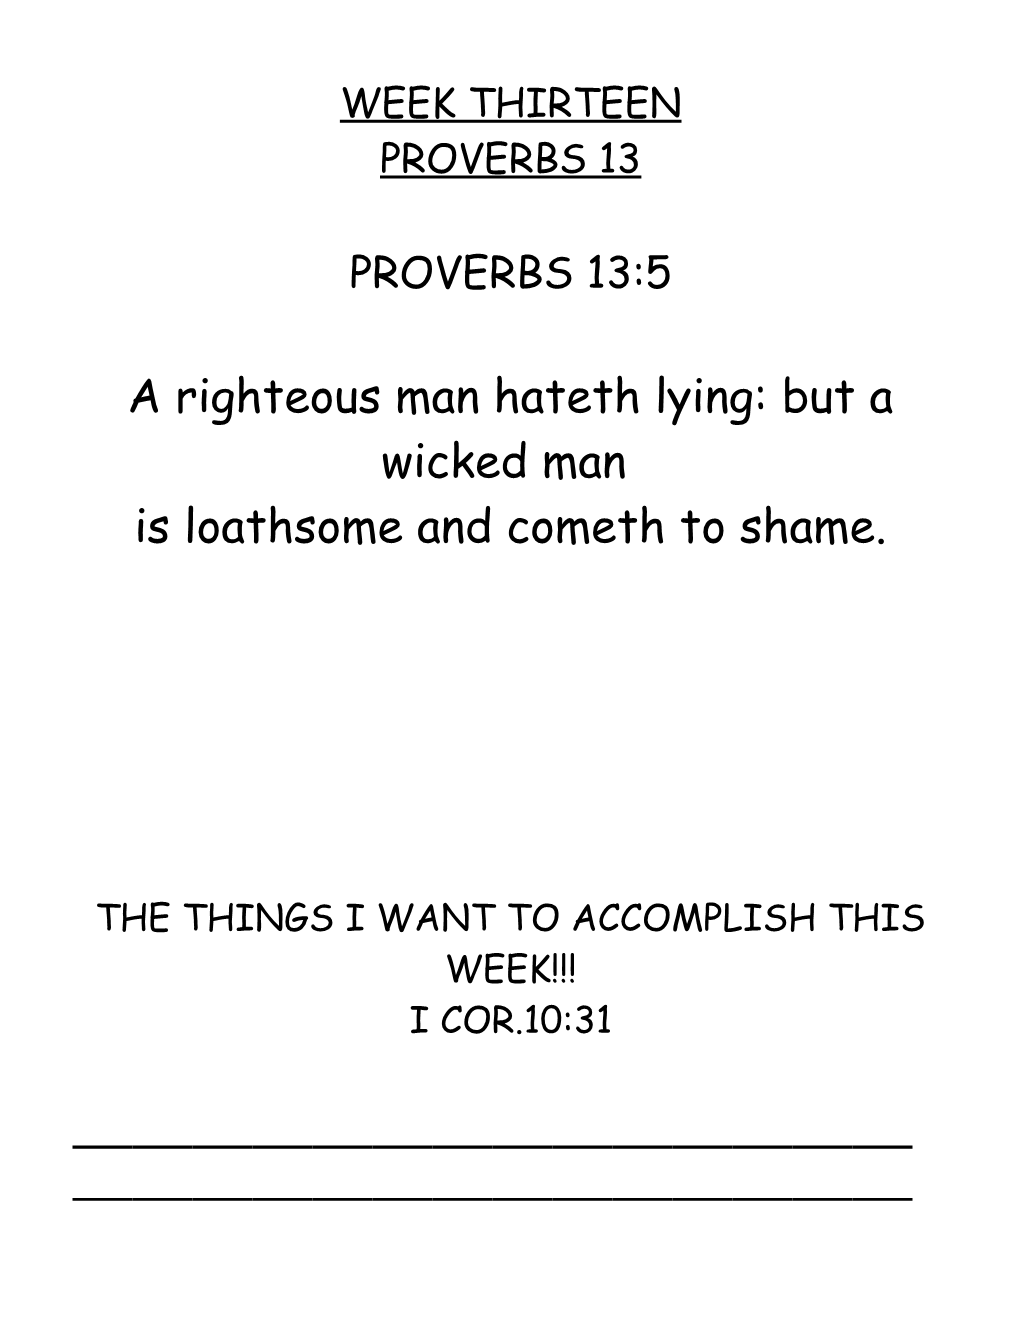 A Righteous Man Hateth Lying: but a Wicked Man